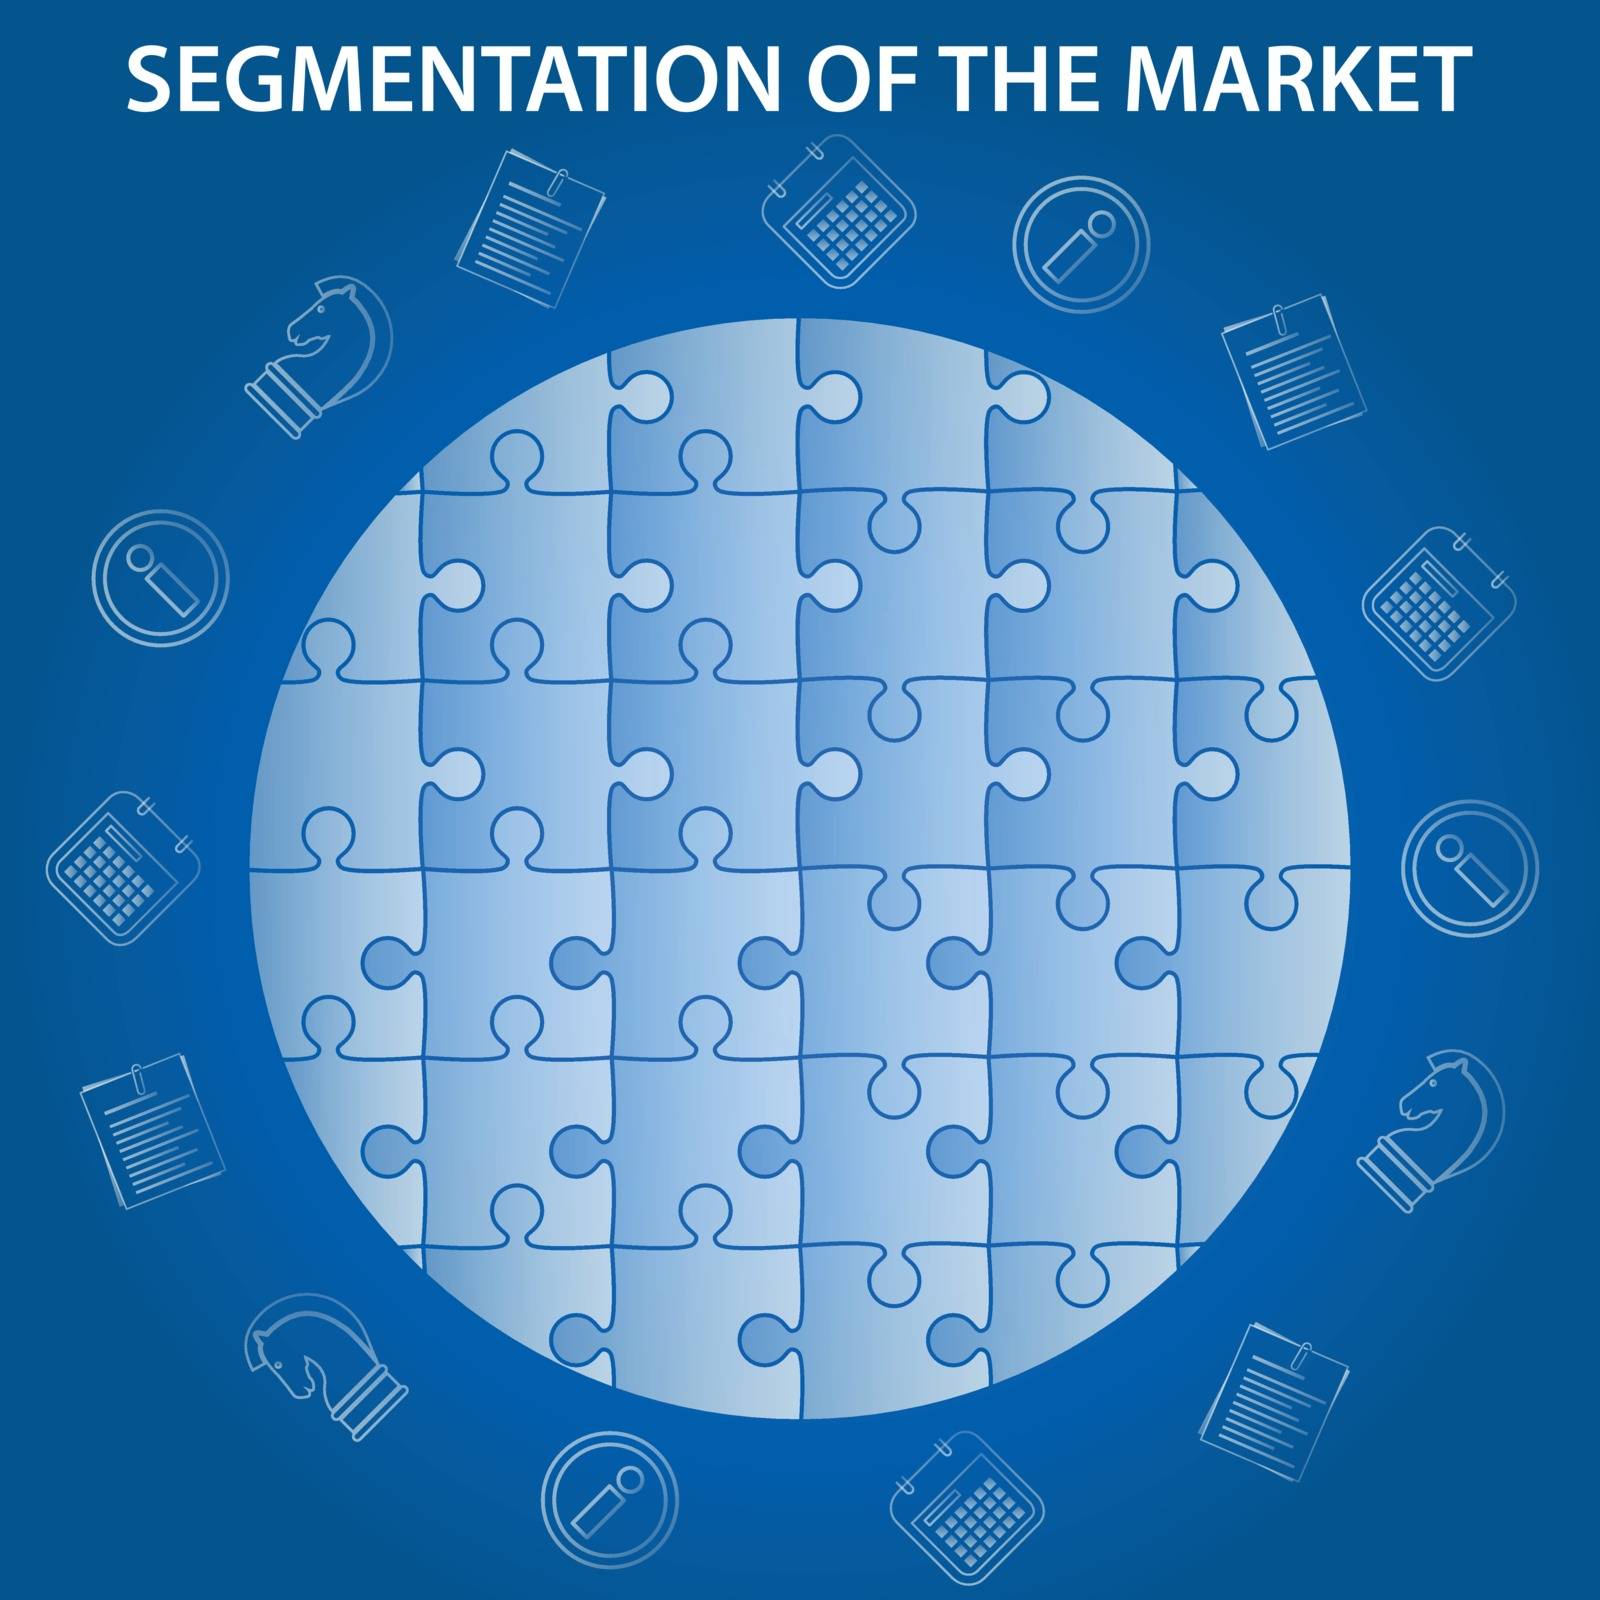 segmentation of market infographic by Ardely